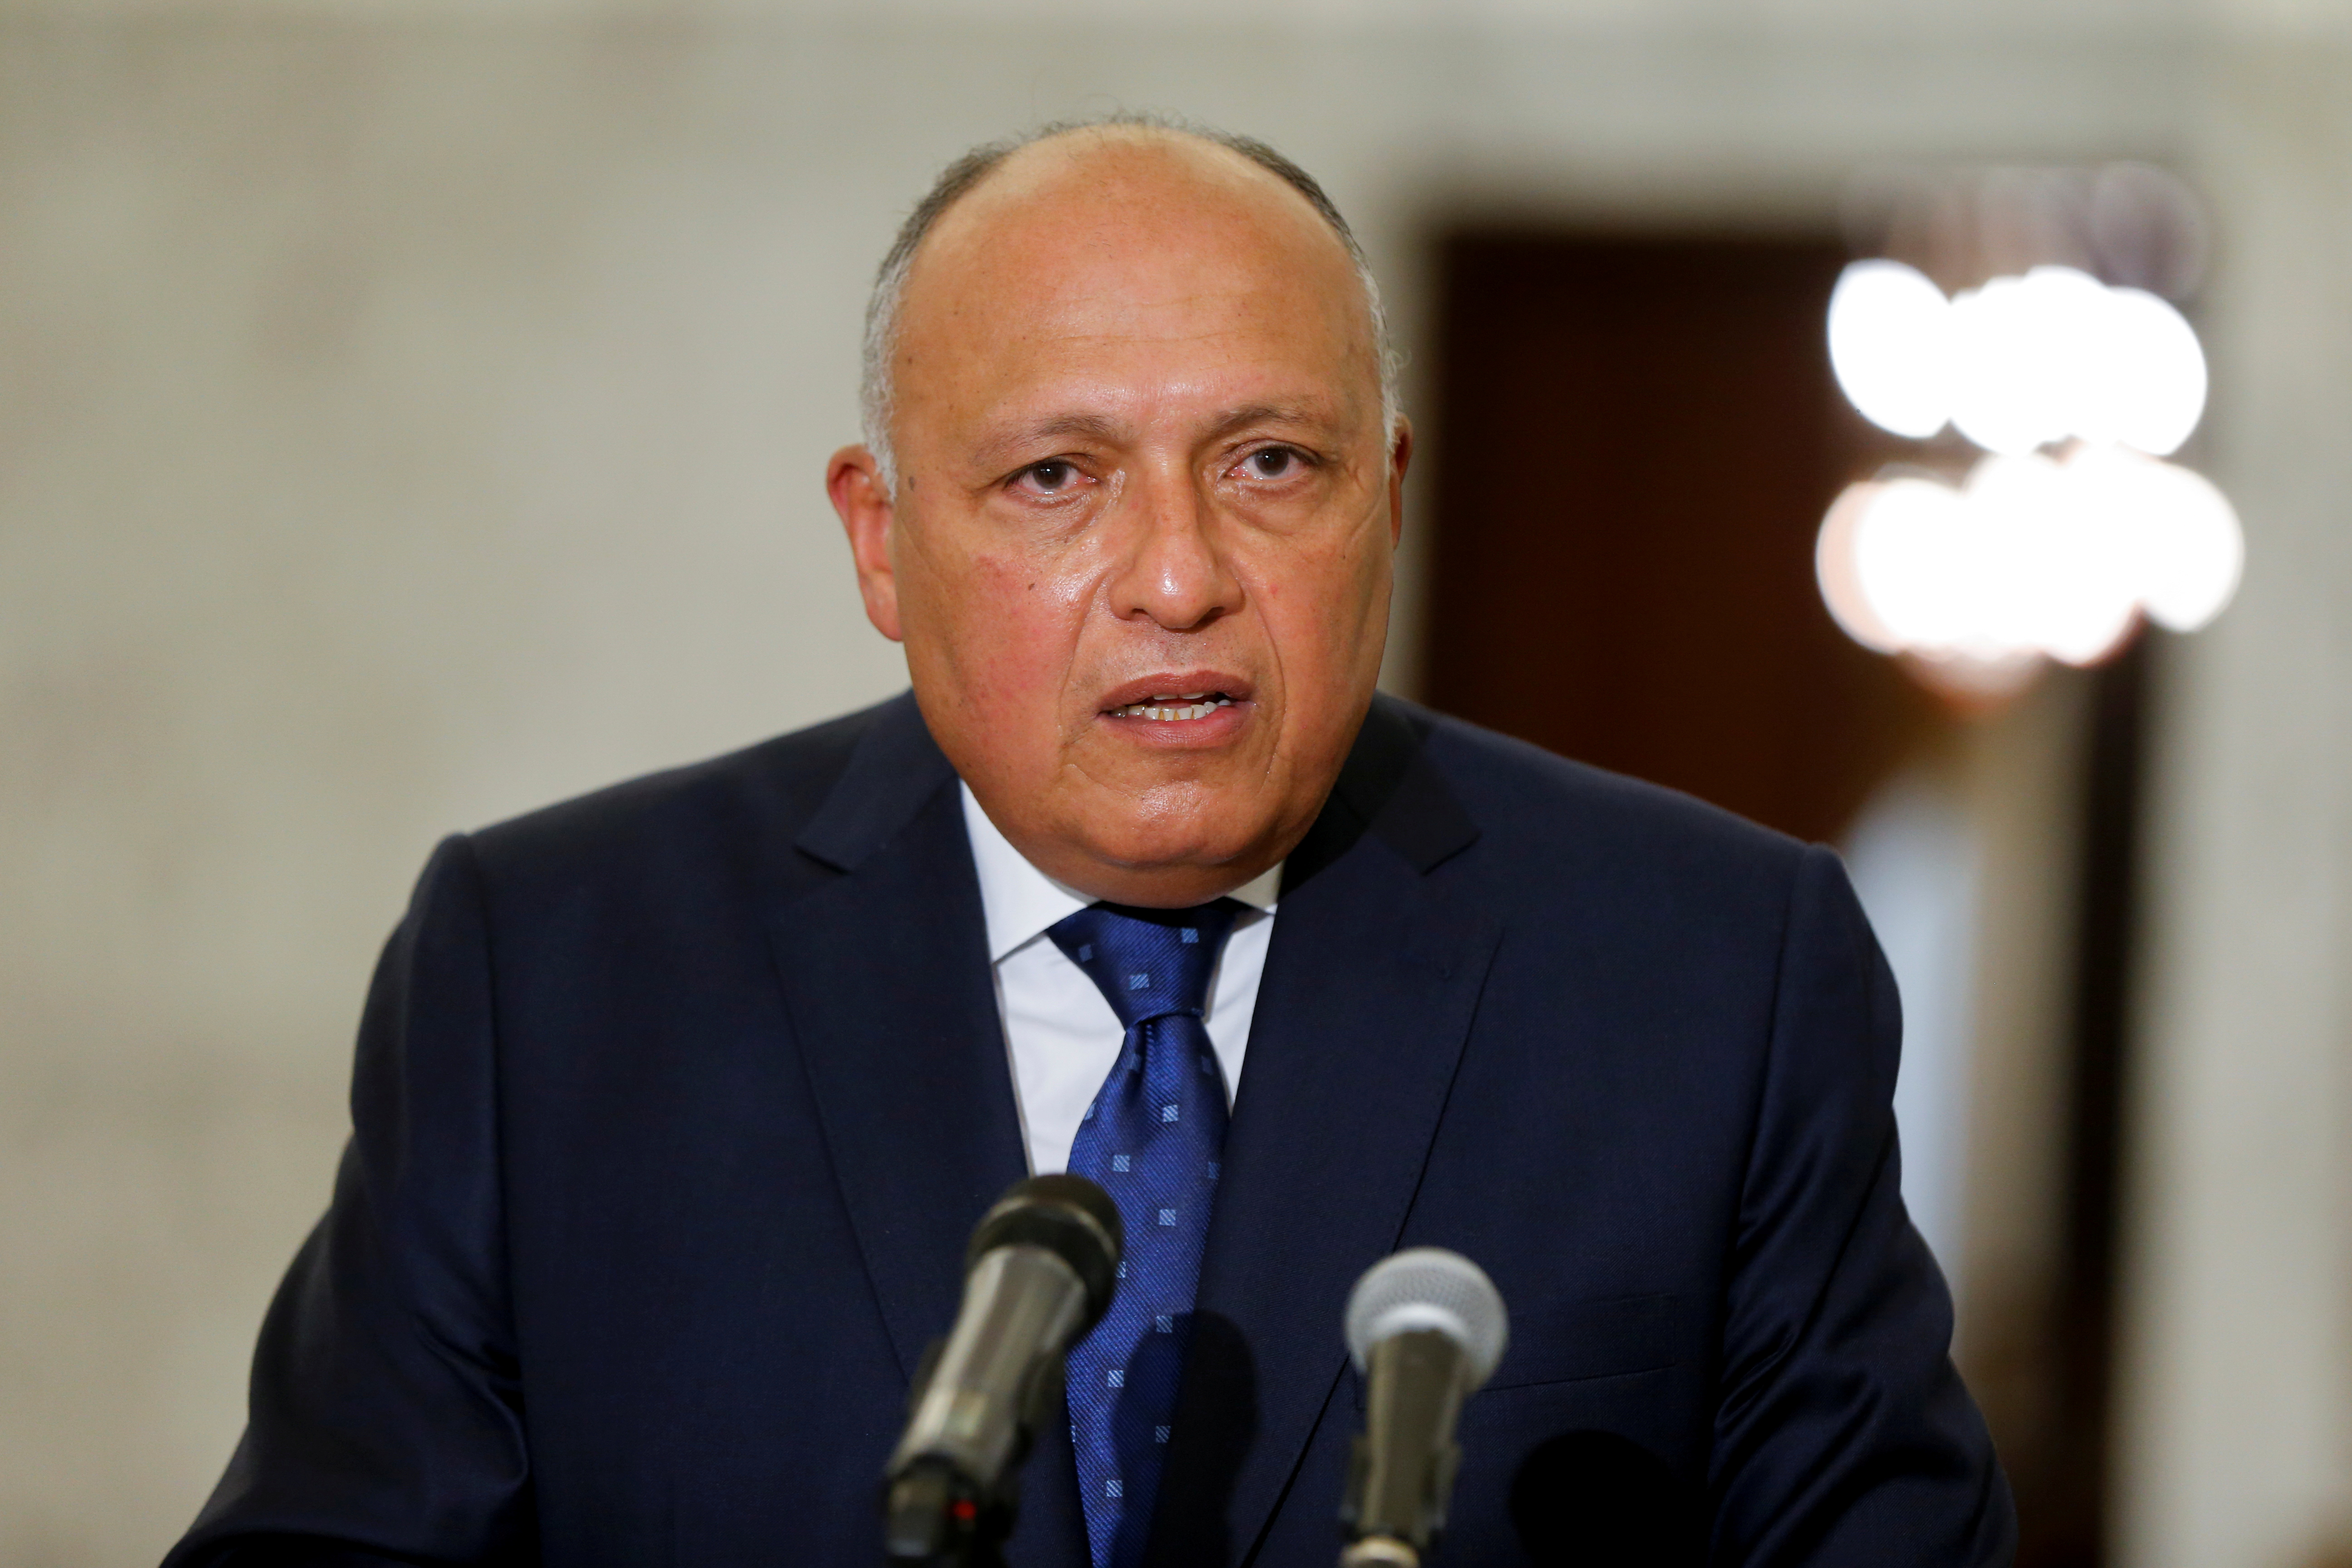 Egyptian Foreign Minister Sameh Shoukry speaks after meeting with Lebanon's President Michel Aoun at the presidential palace in Baabda, Lebanon April 7, 2021. REUTERS/Mohamed Azakir